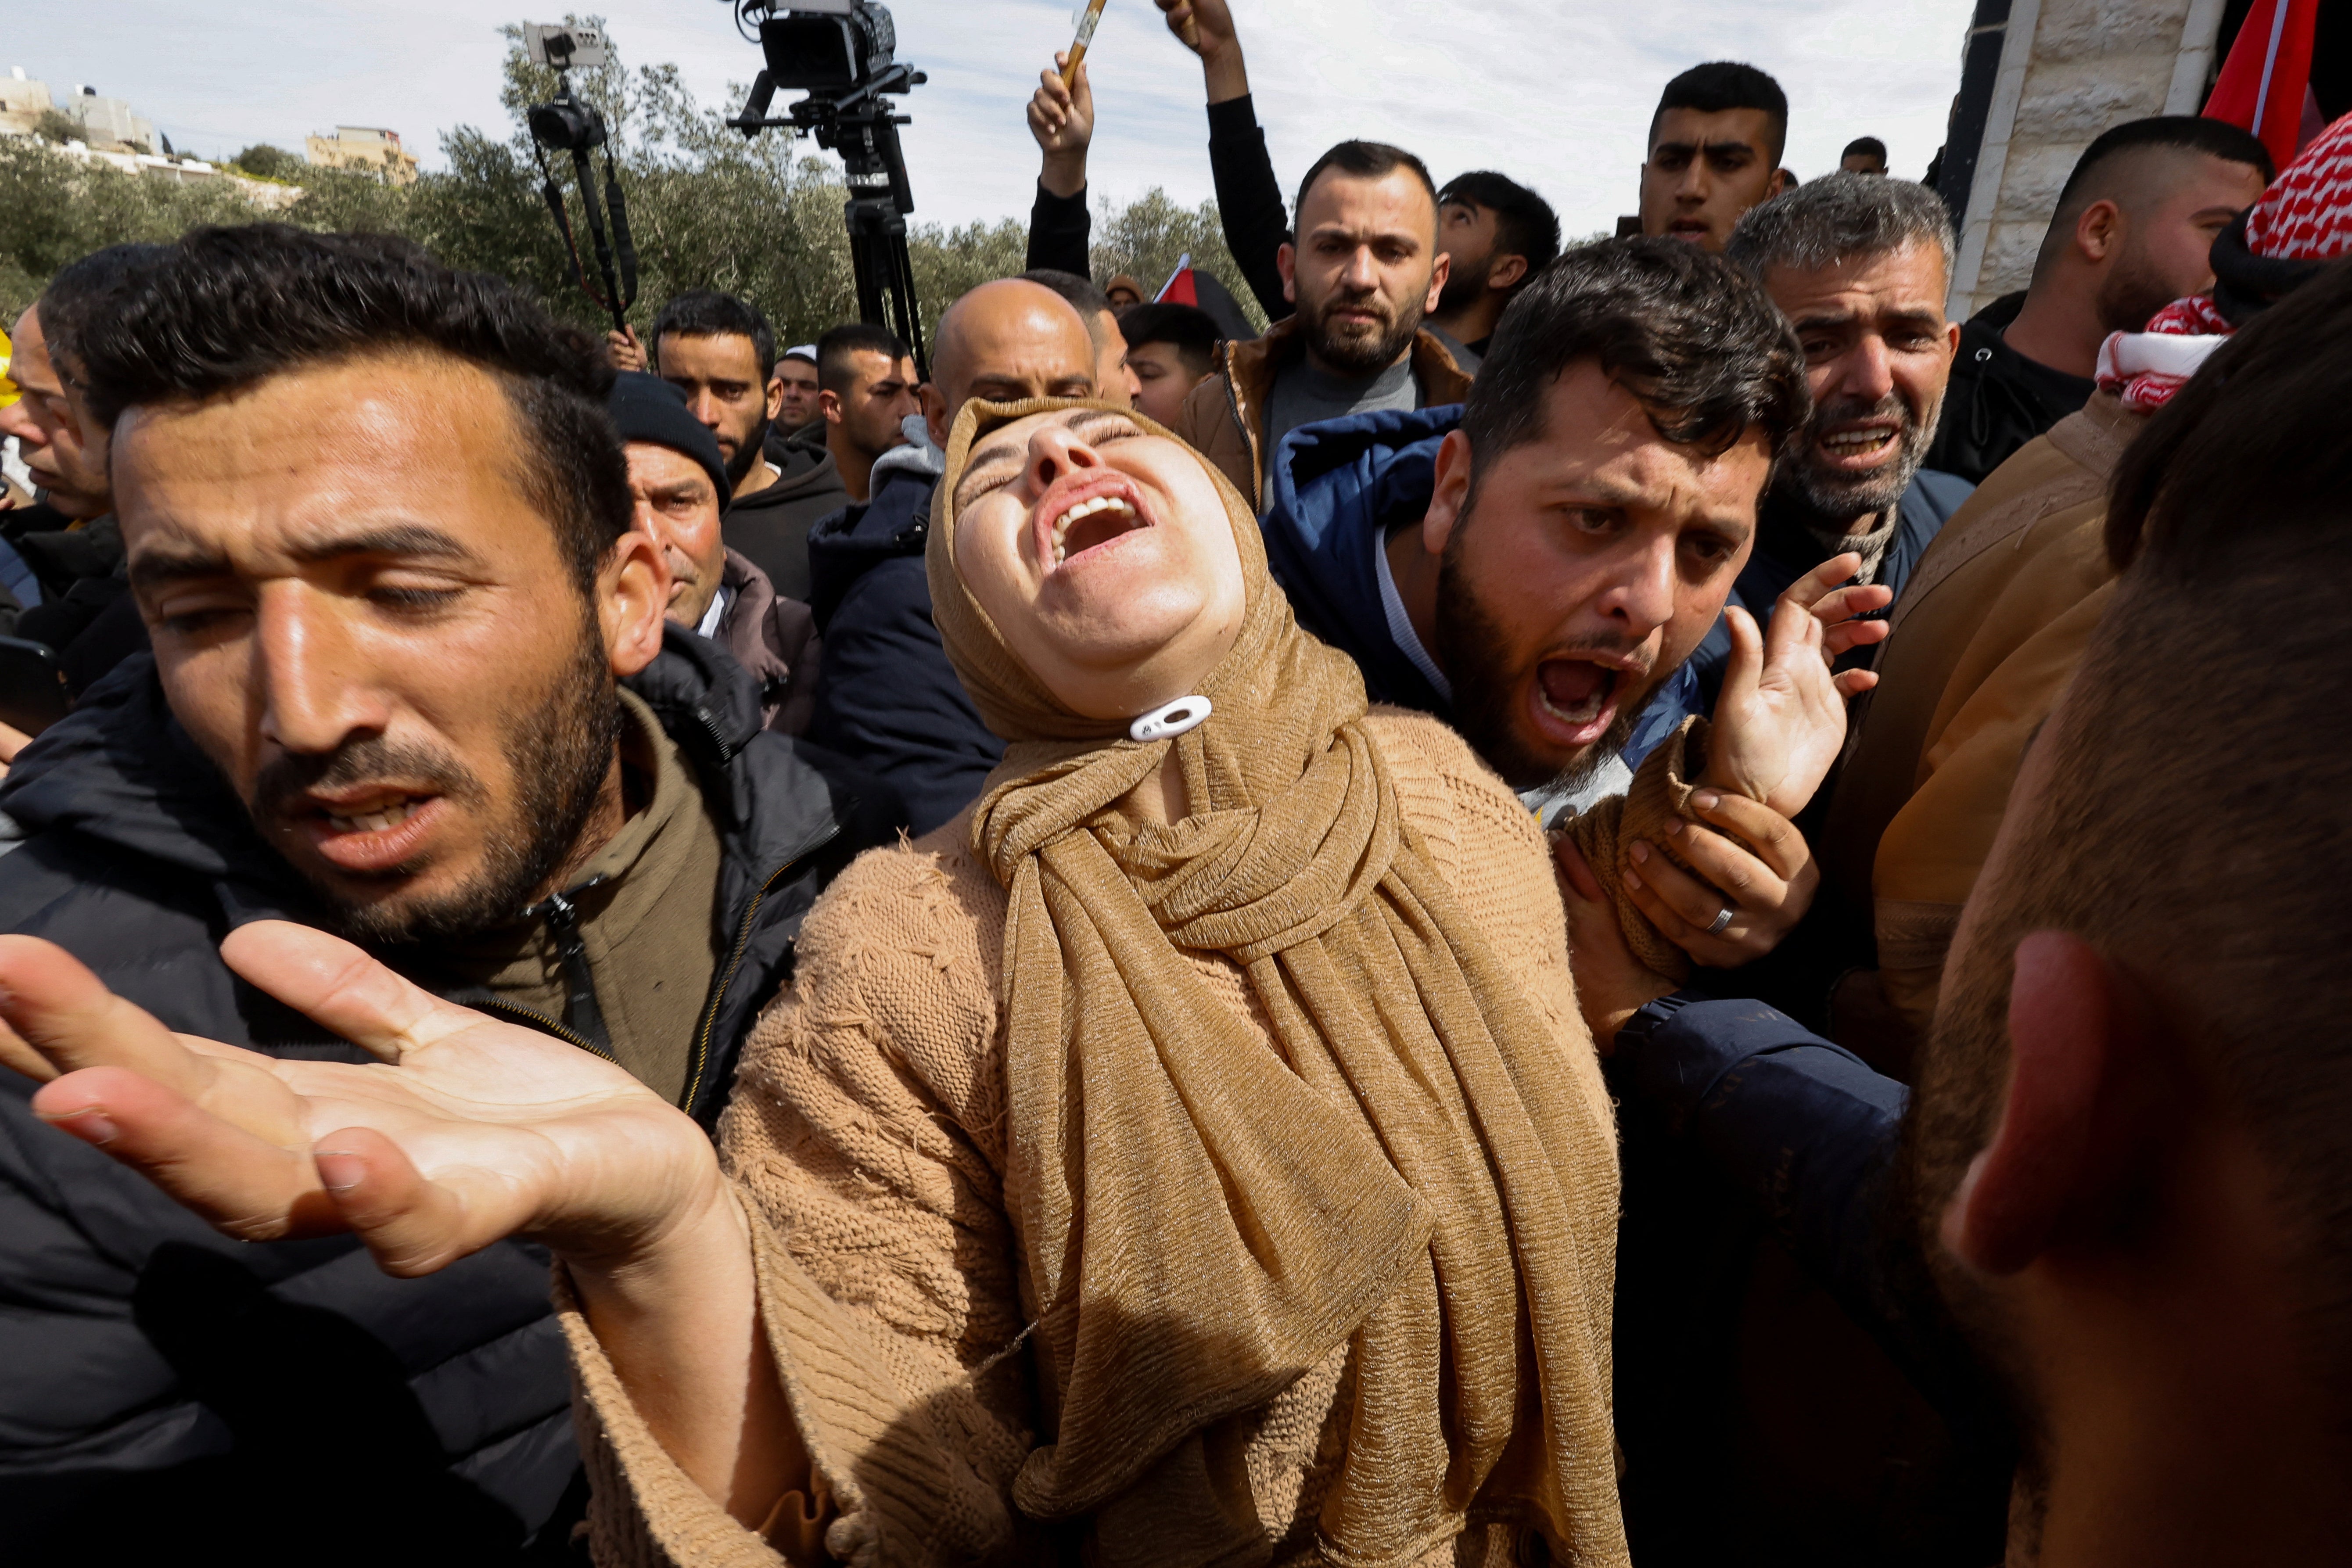 A funeral for two Palestinians killed by Israeli forces in the occupied West Bank